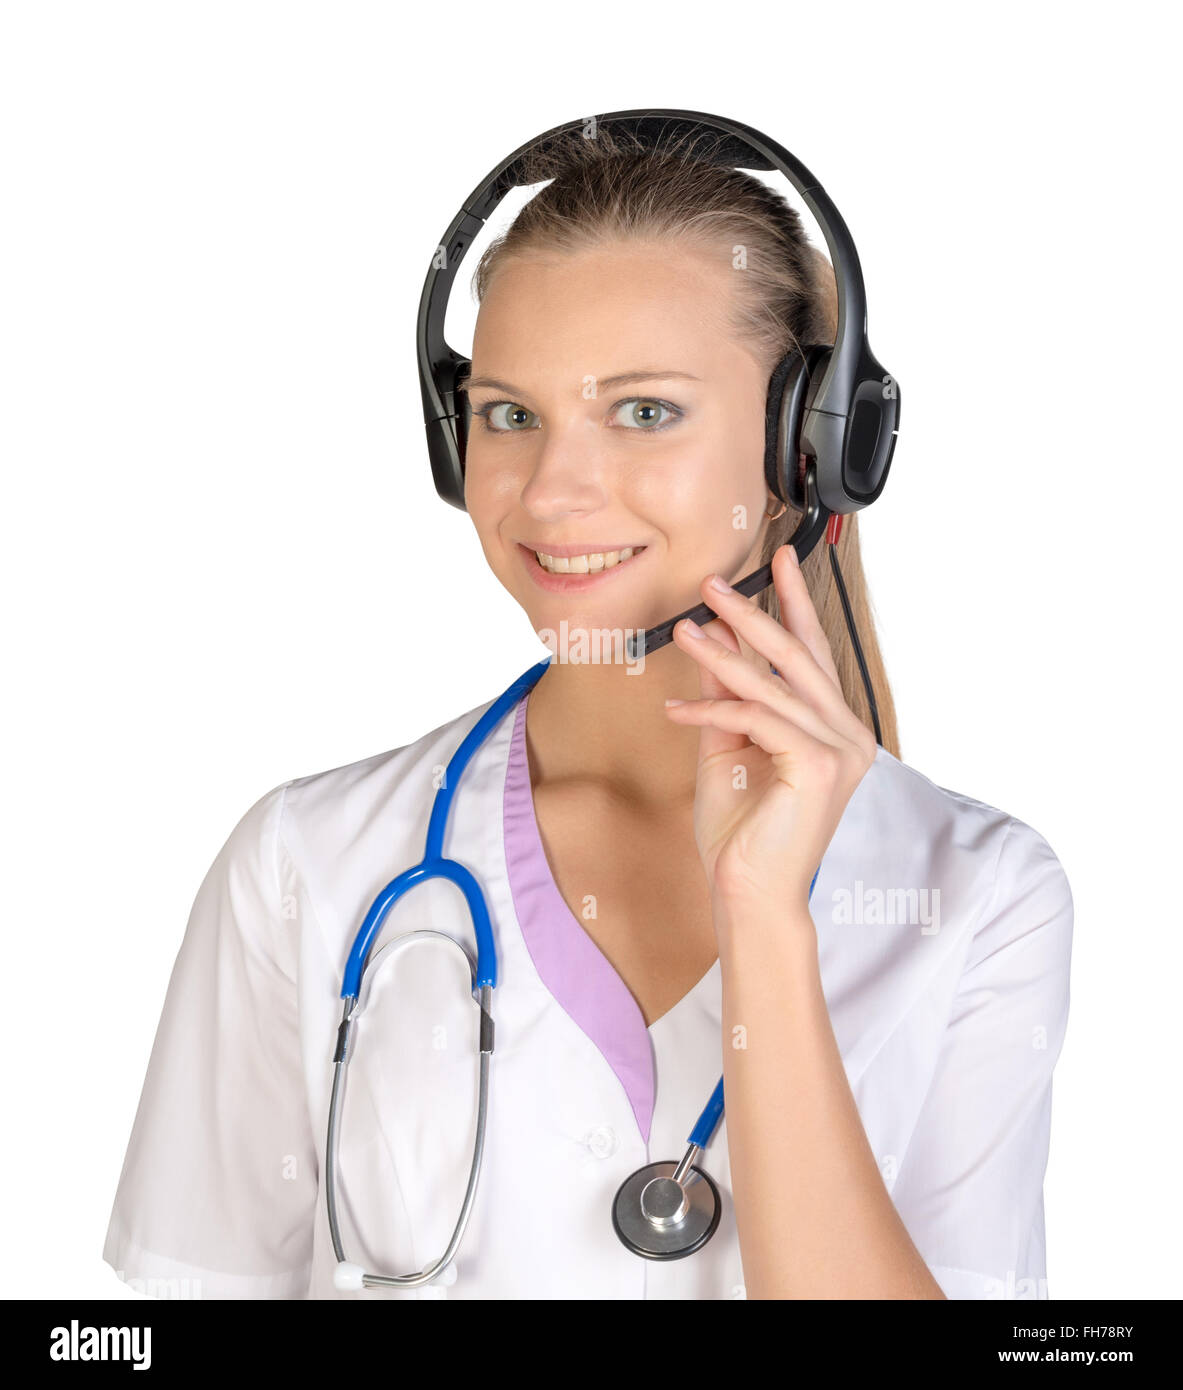 Medical call center concept - woman with headphone isolated on white Stock Photo